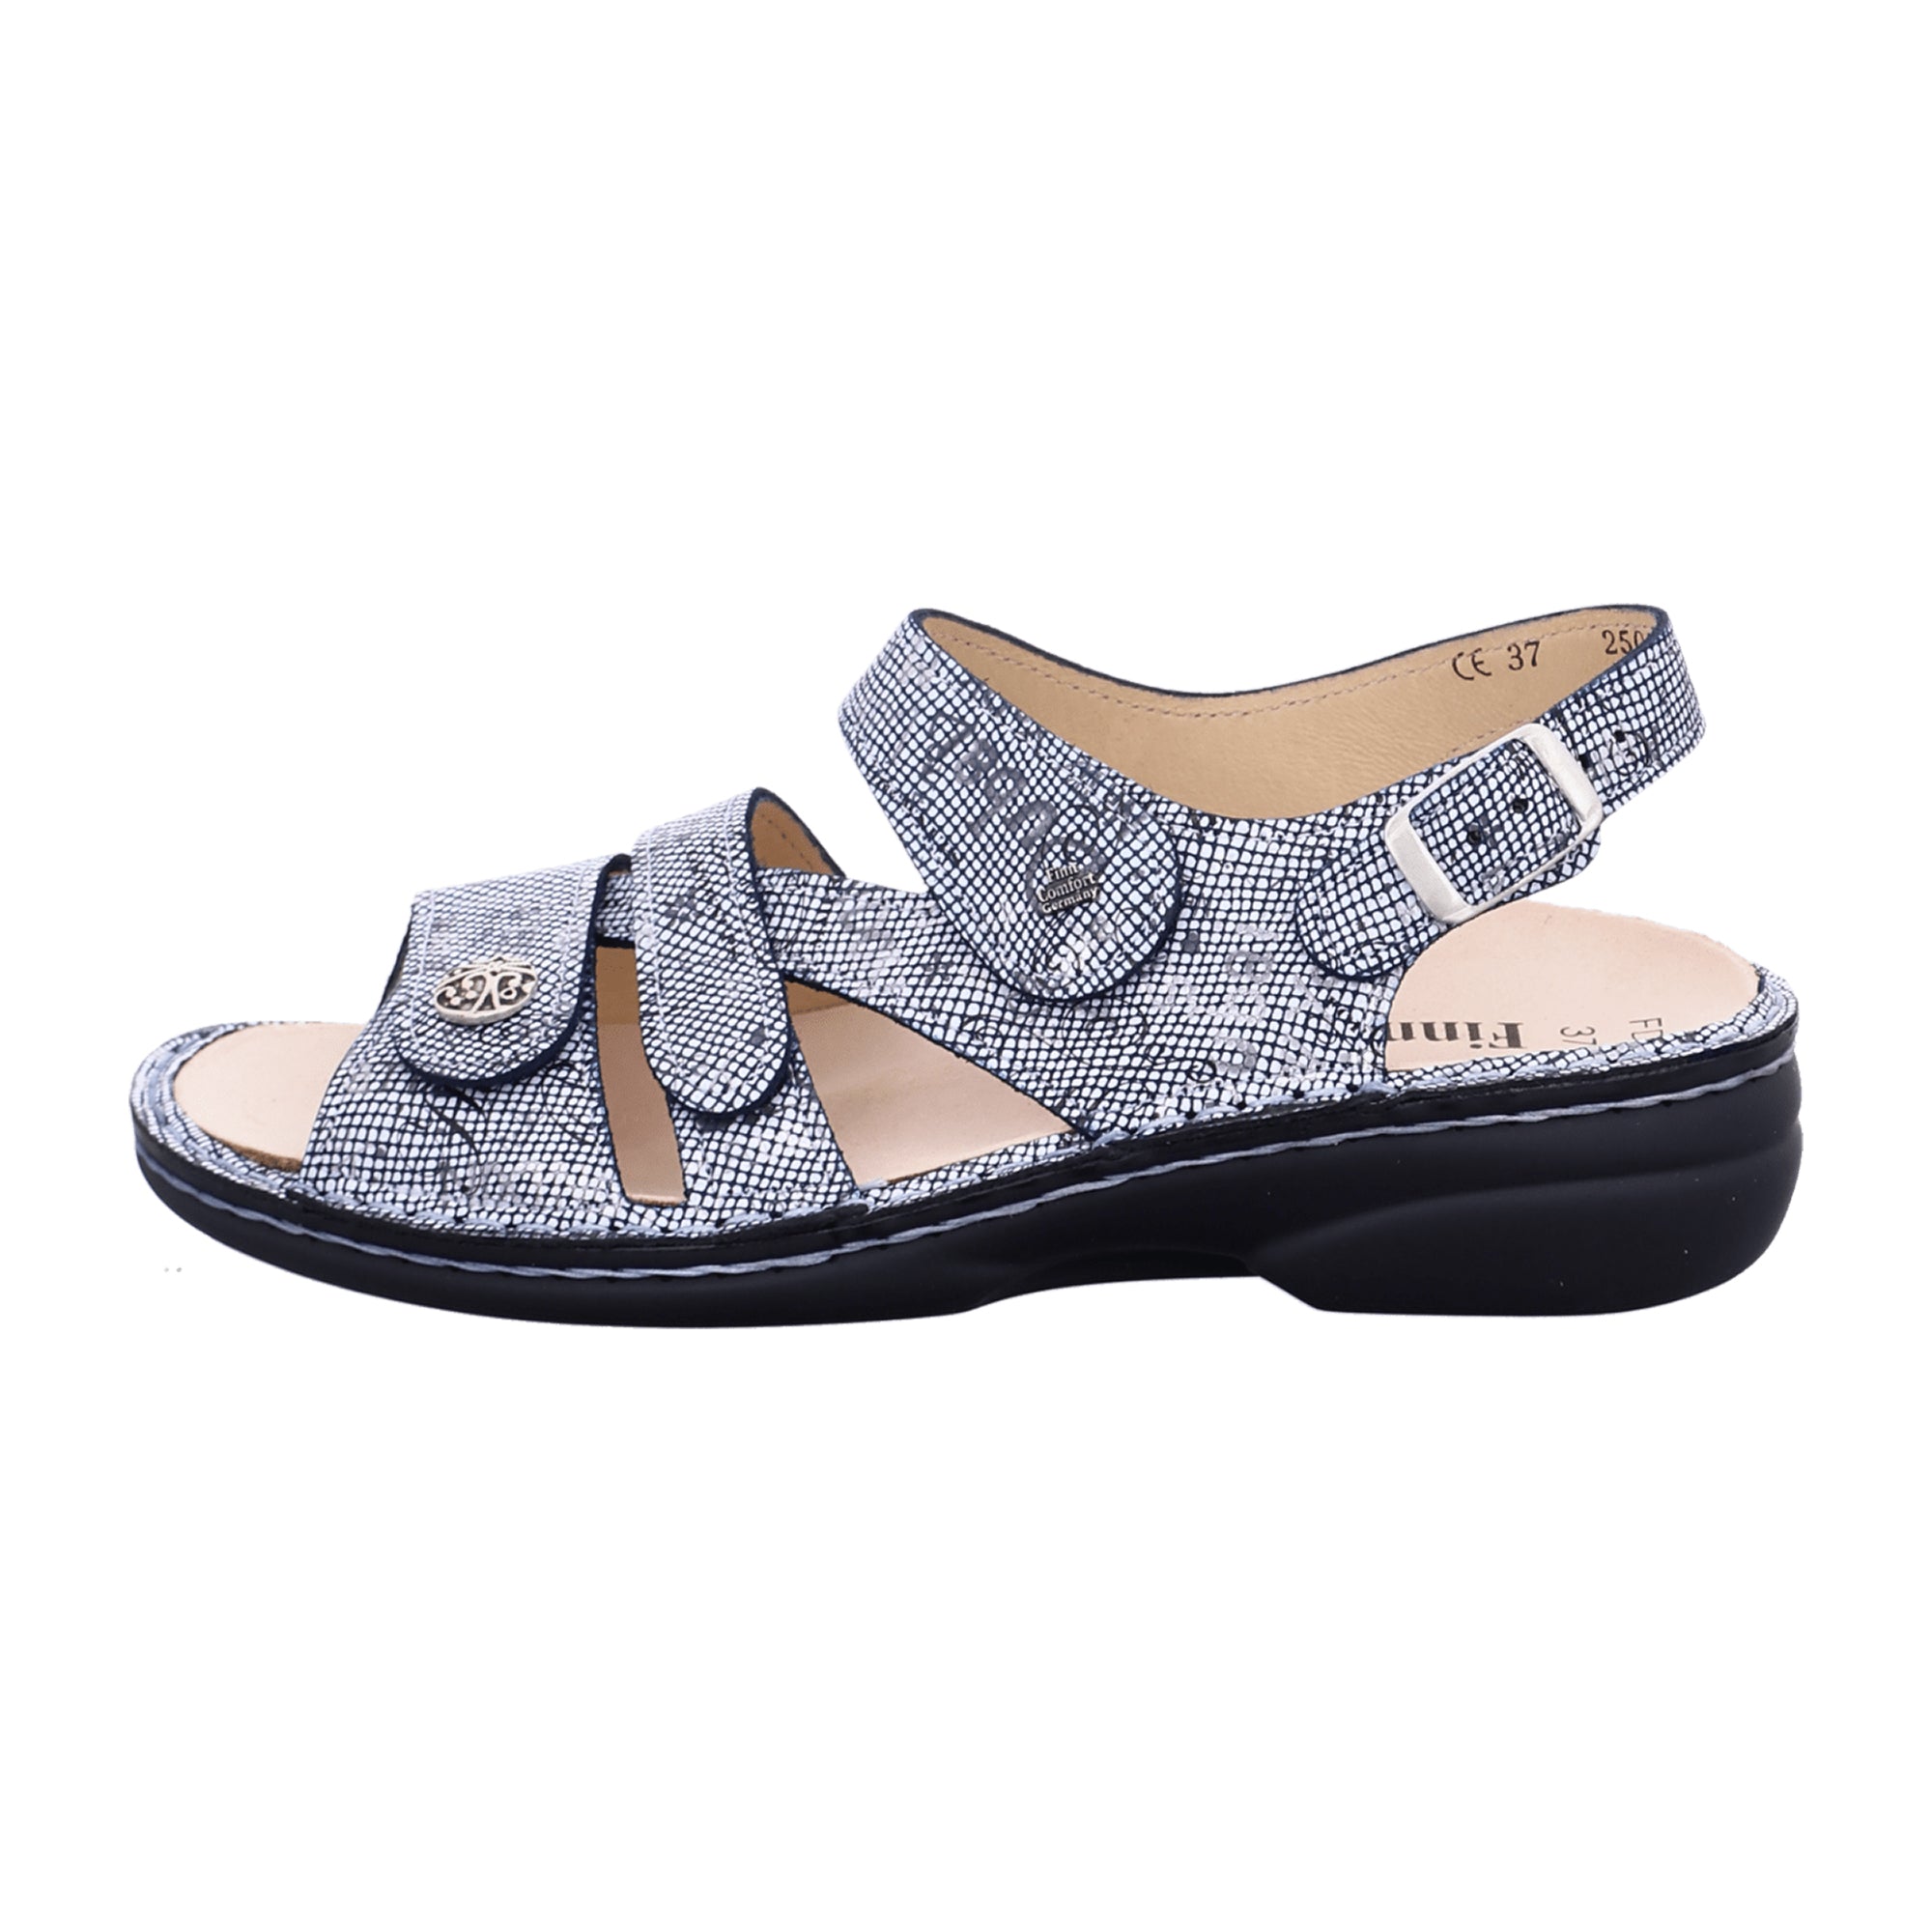 Finn Comfort Gomera Women's Comfort Sandals, Stylish Blue Leather - Perfect for Daily Wear